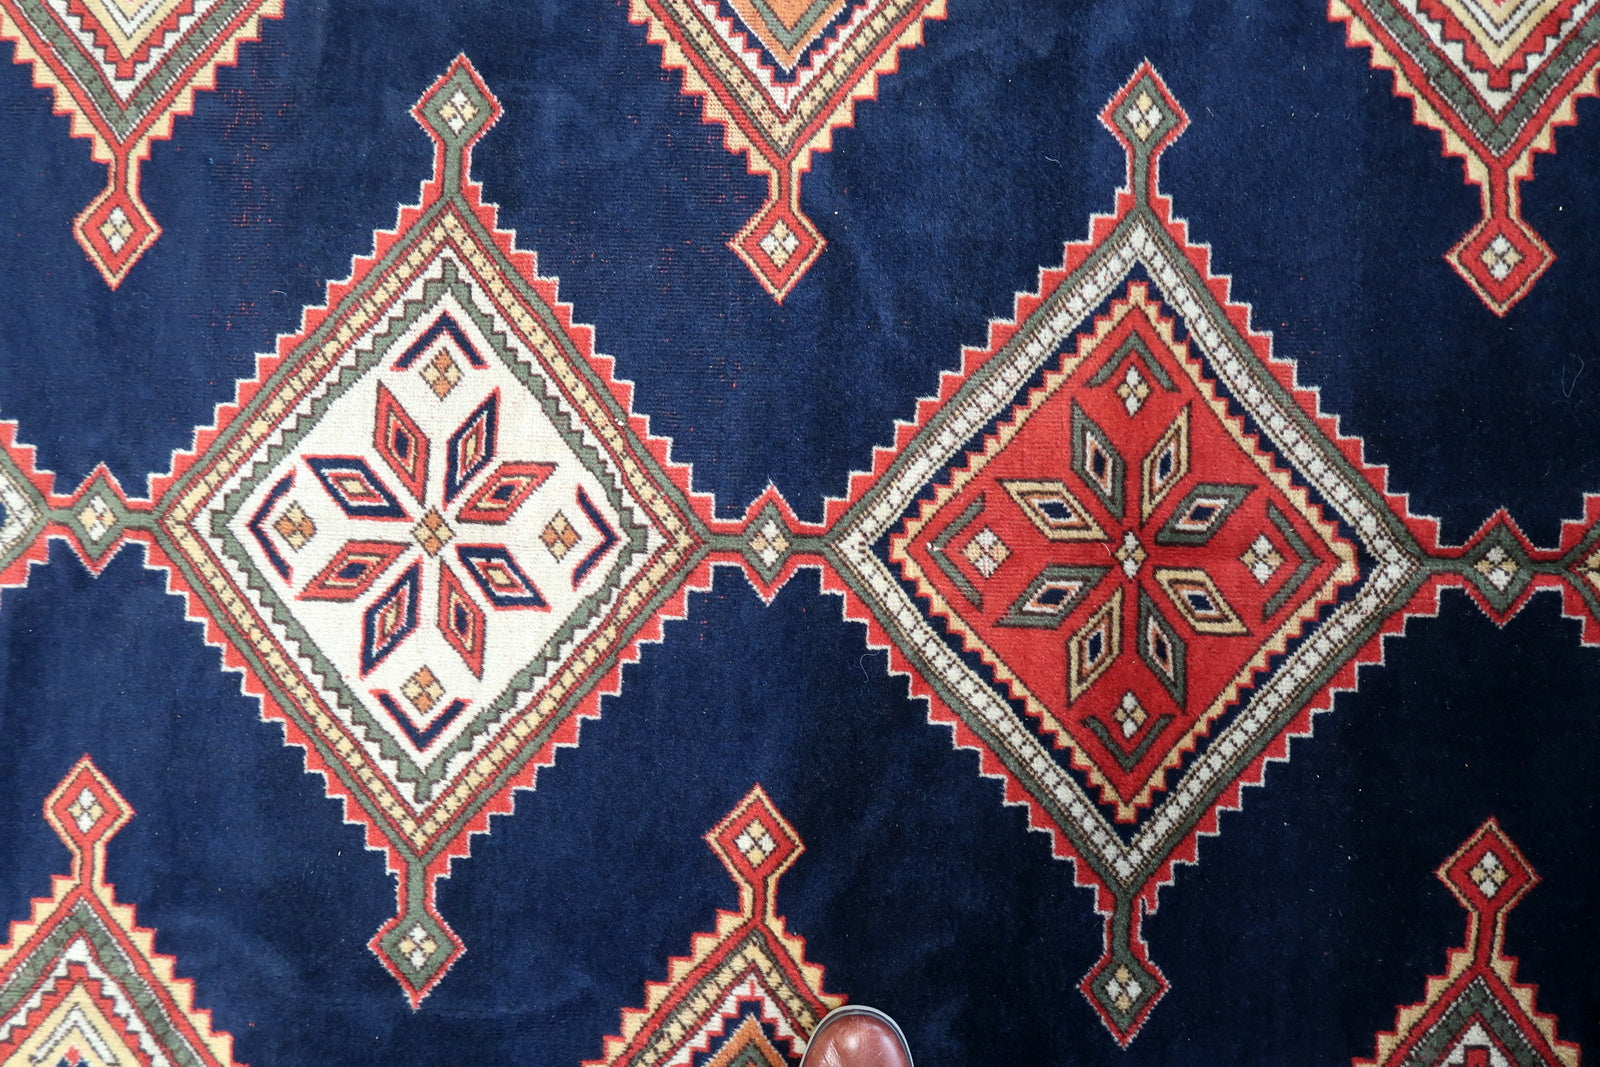 Close-up of the wool fibers, highlighting the rug's warmth and durability